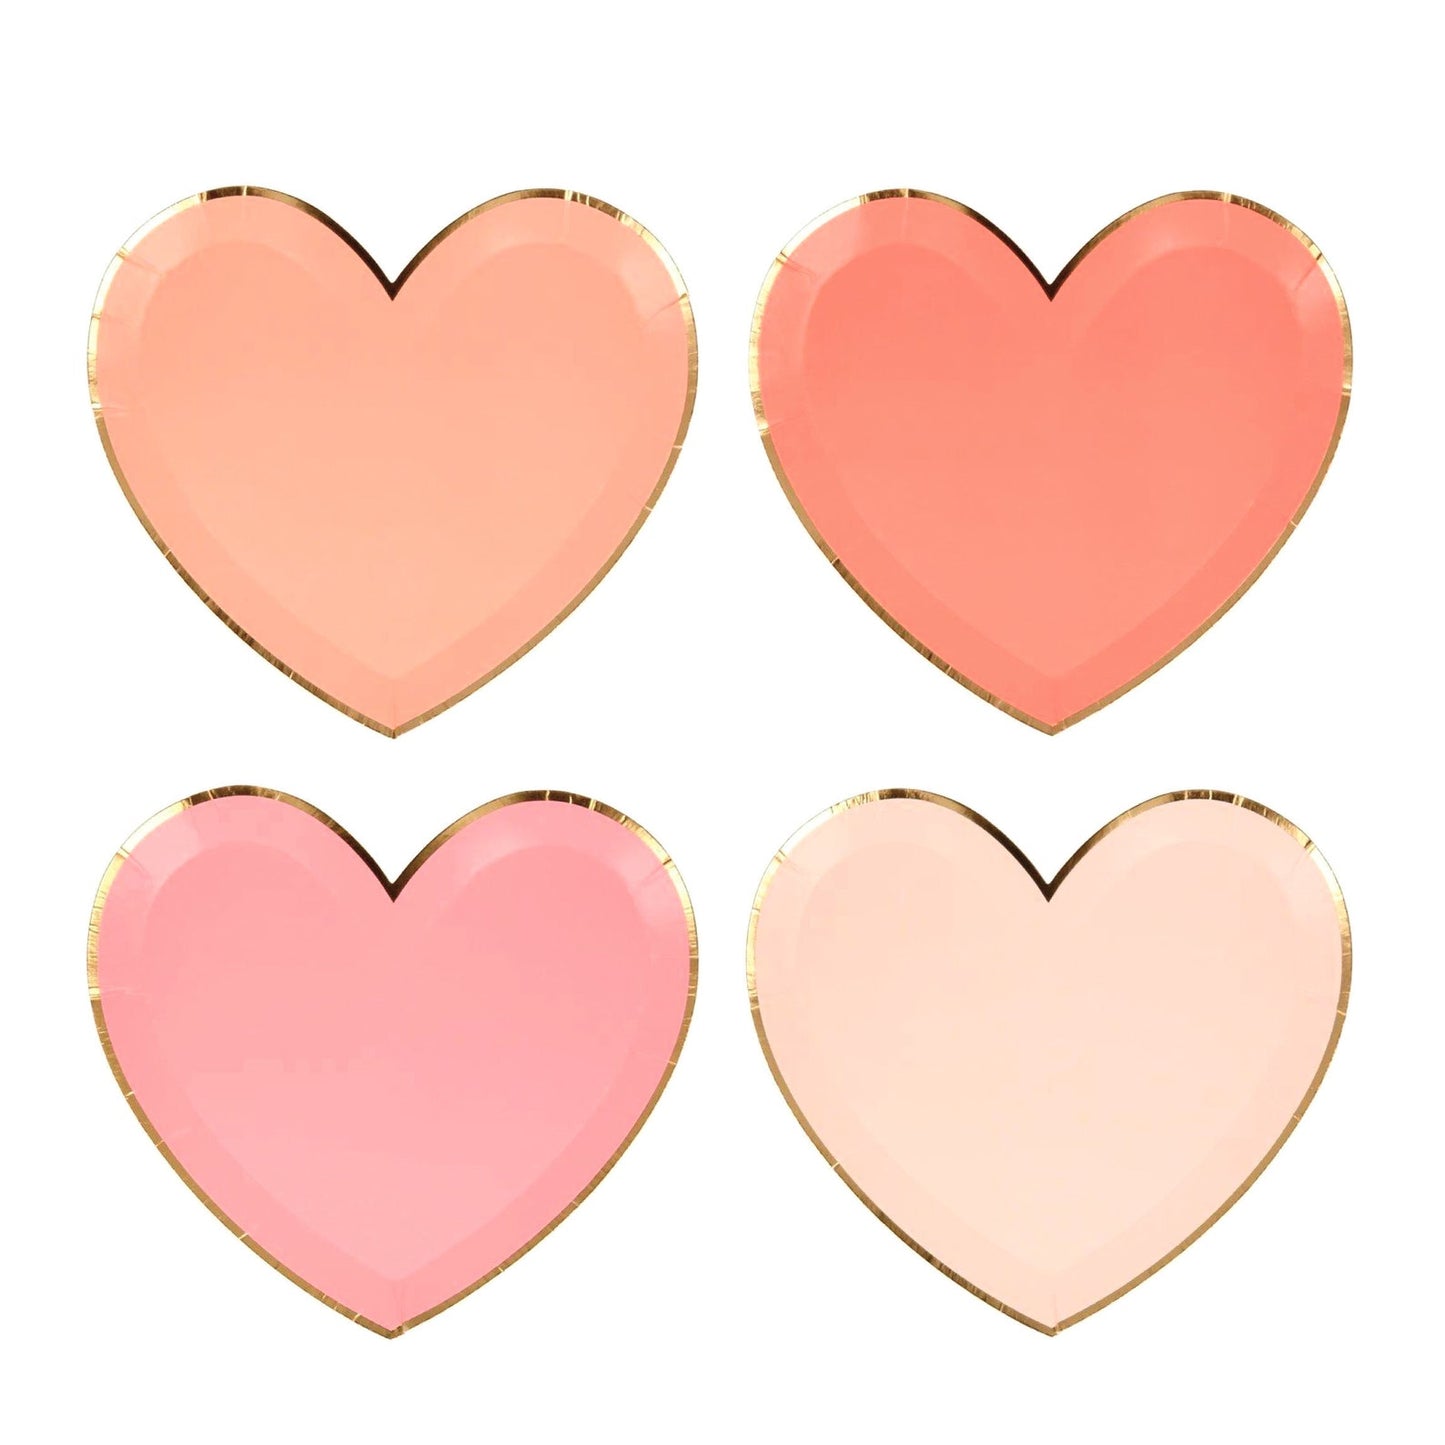 assorted pink heart shaped plates